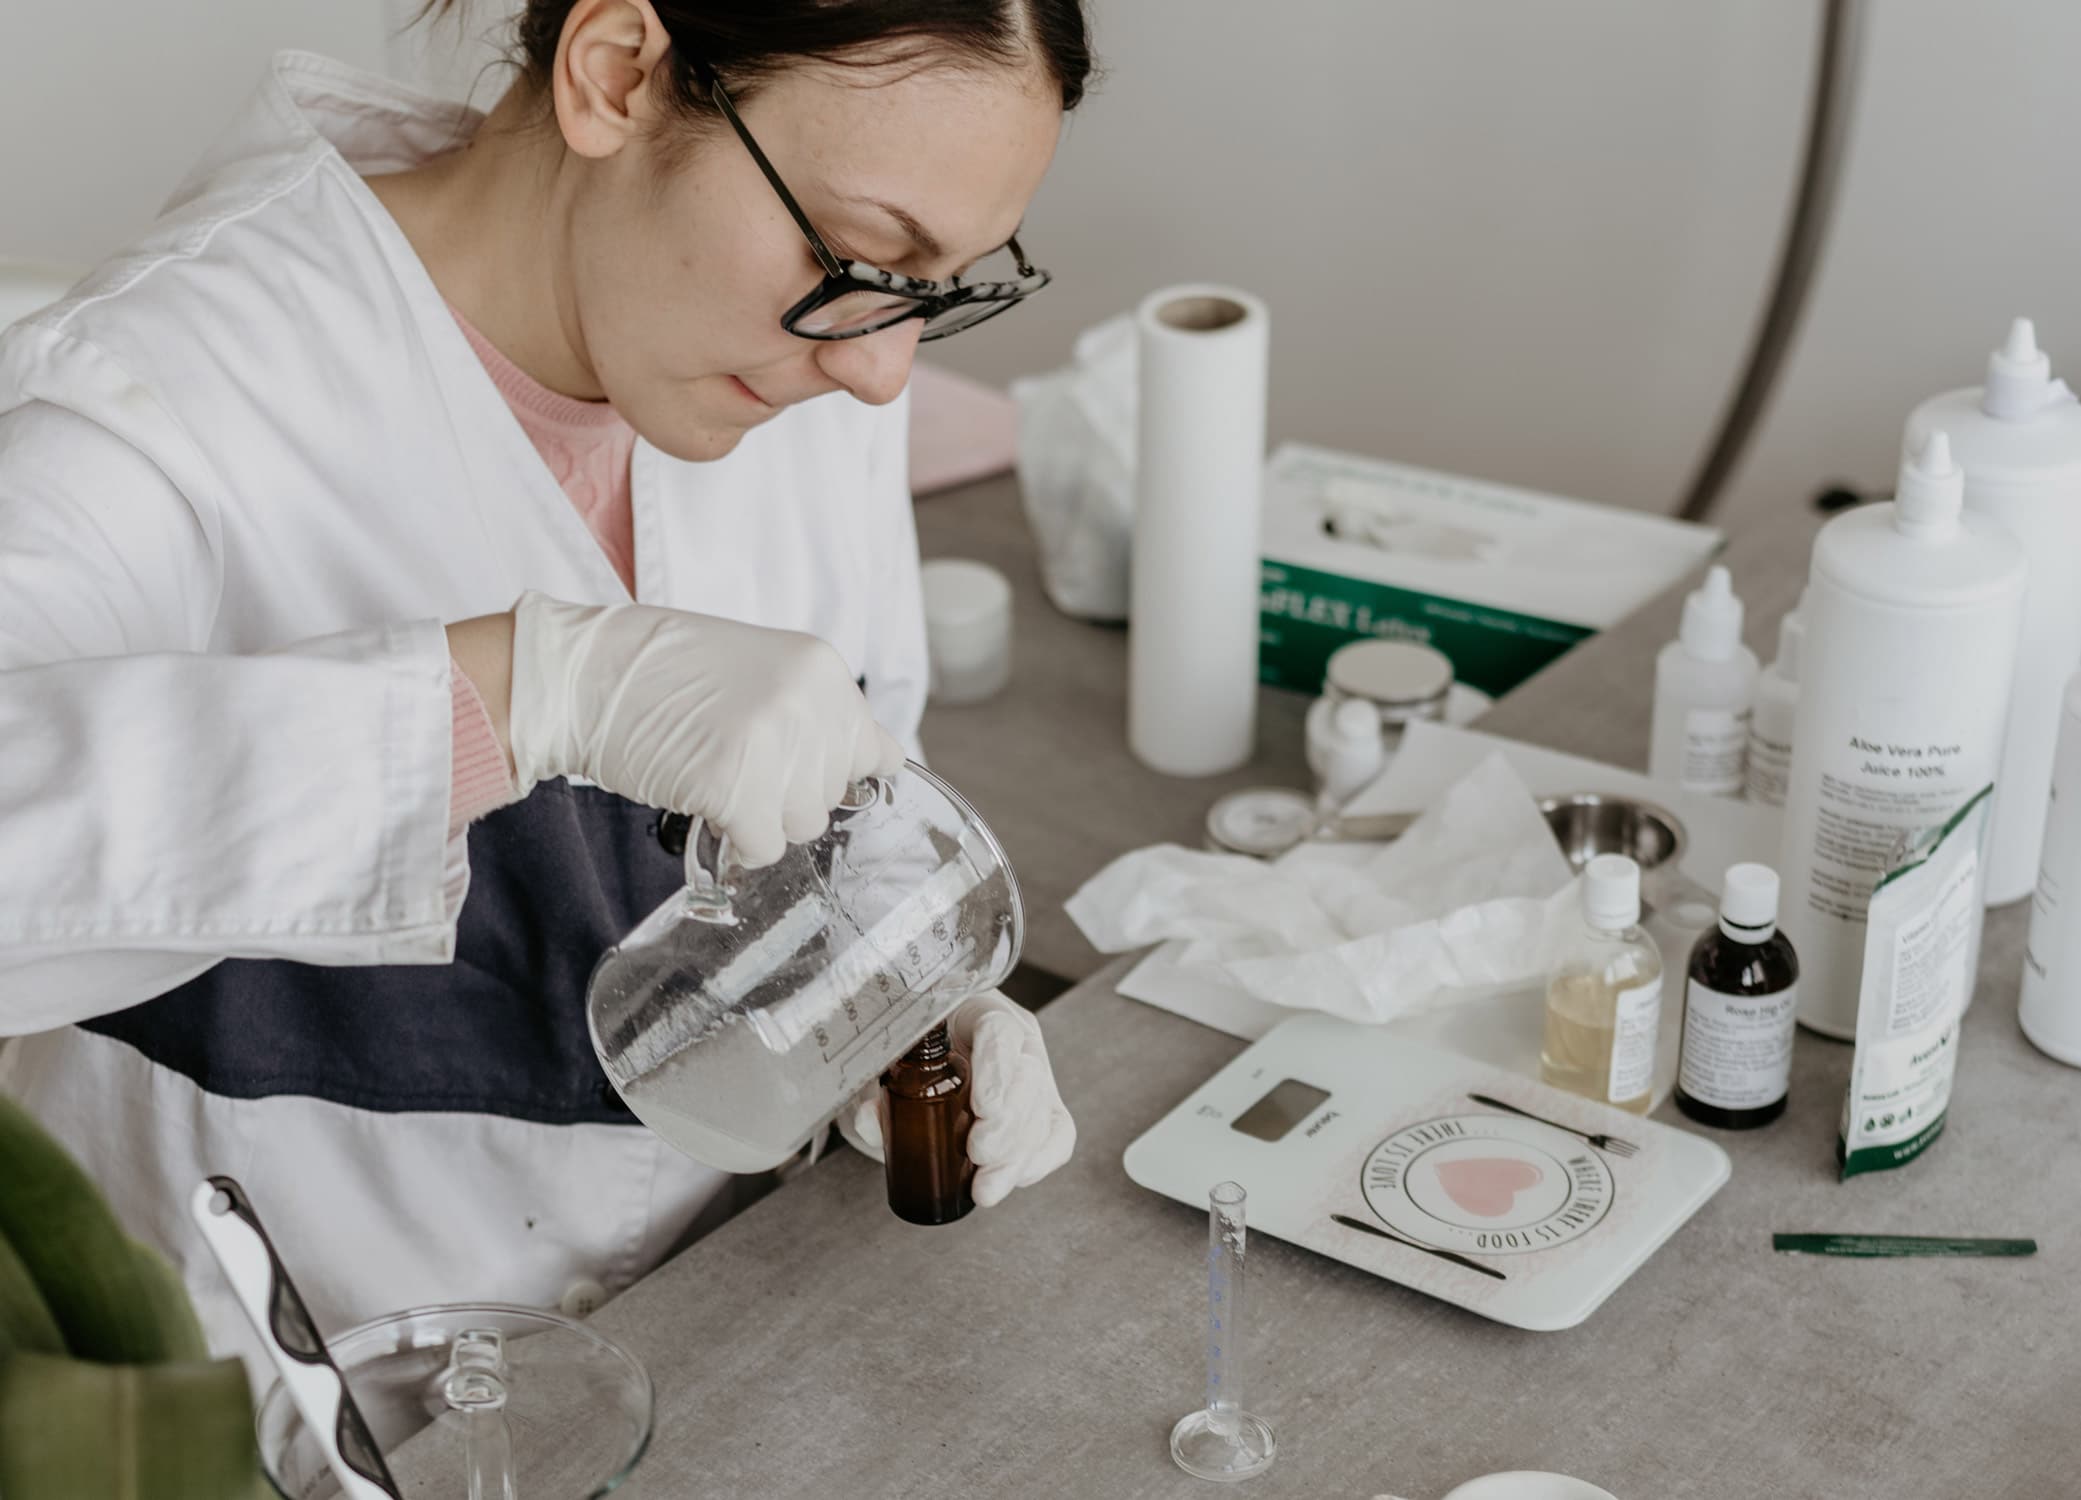 Manufacturer creating a skincare product in a lab with different liquids and mixture tools on table.